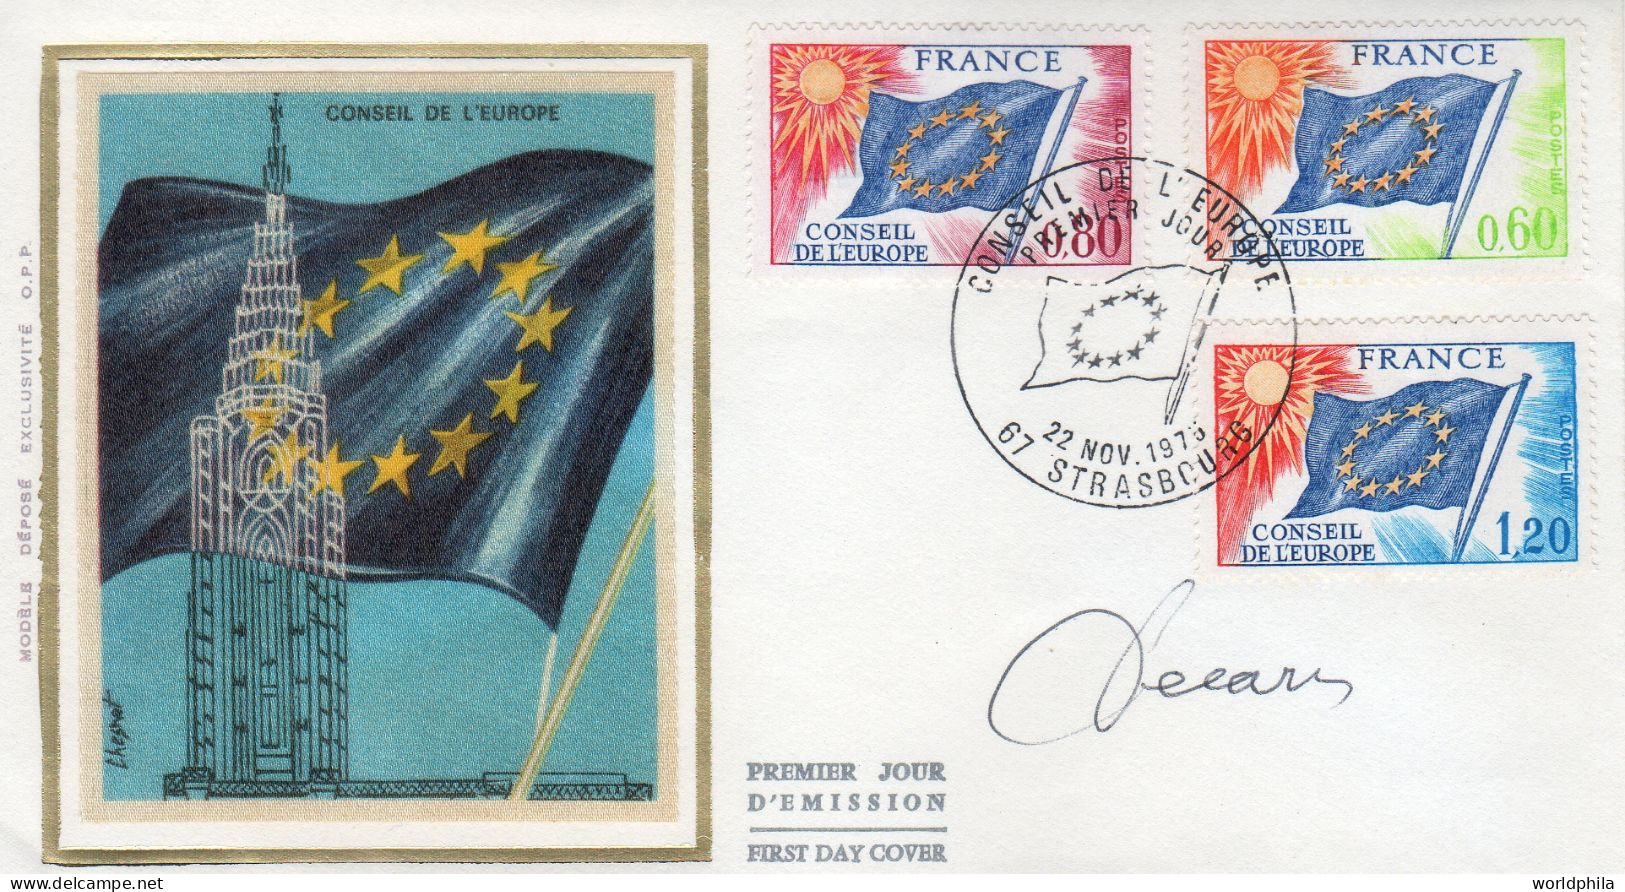 France 1975 FDC Autographed, Drawn And Engraved By Albert Decaris "Conseil De L'Europe" - Buste